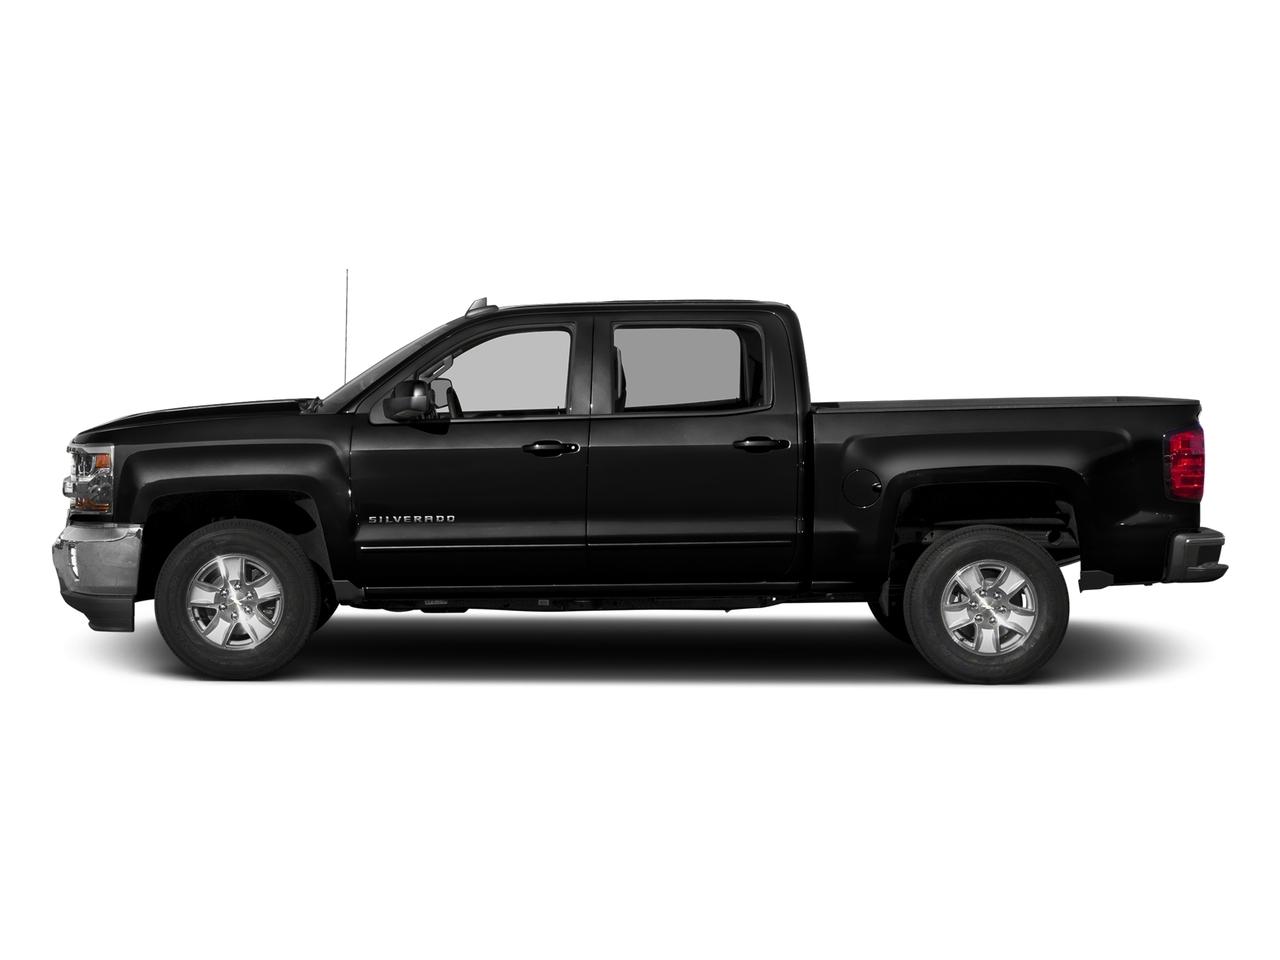 Used 2017 Chevrolet Silverado 1500 LT with VIN 3GCUKREC5HG107555 for sale in Little Rock